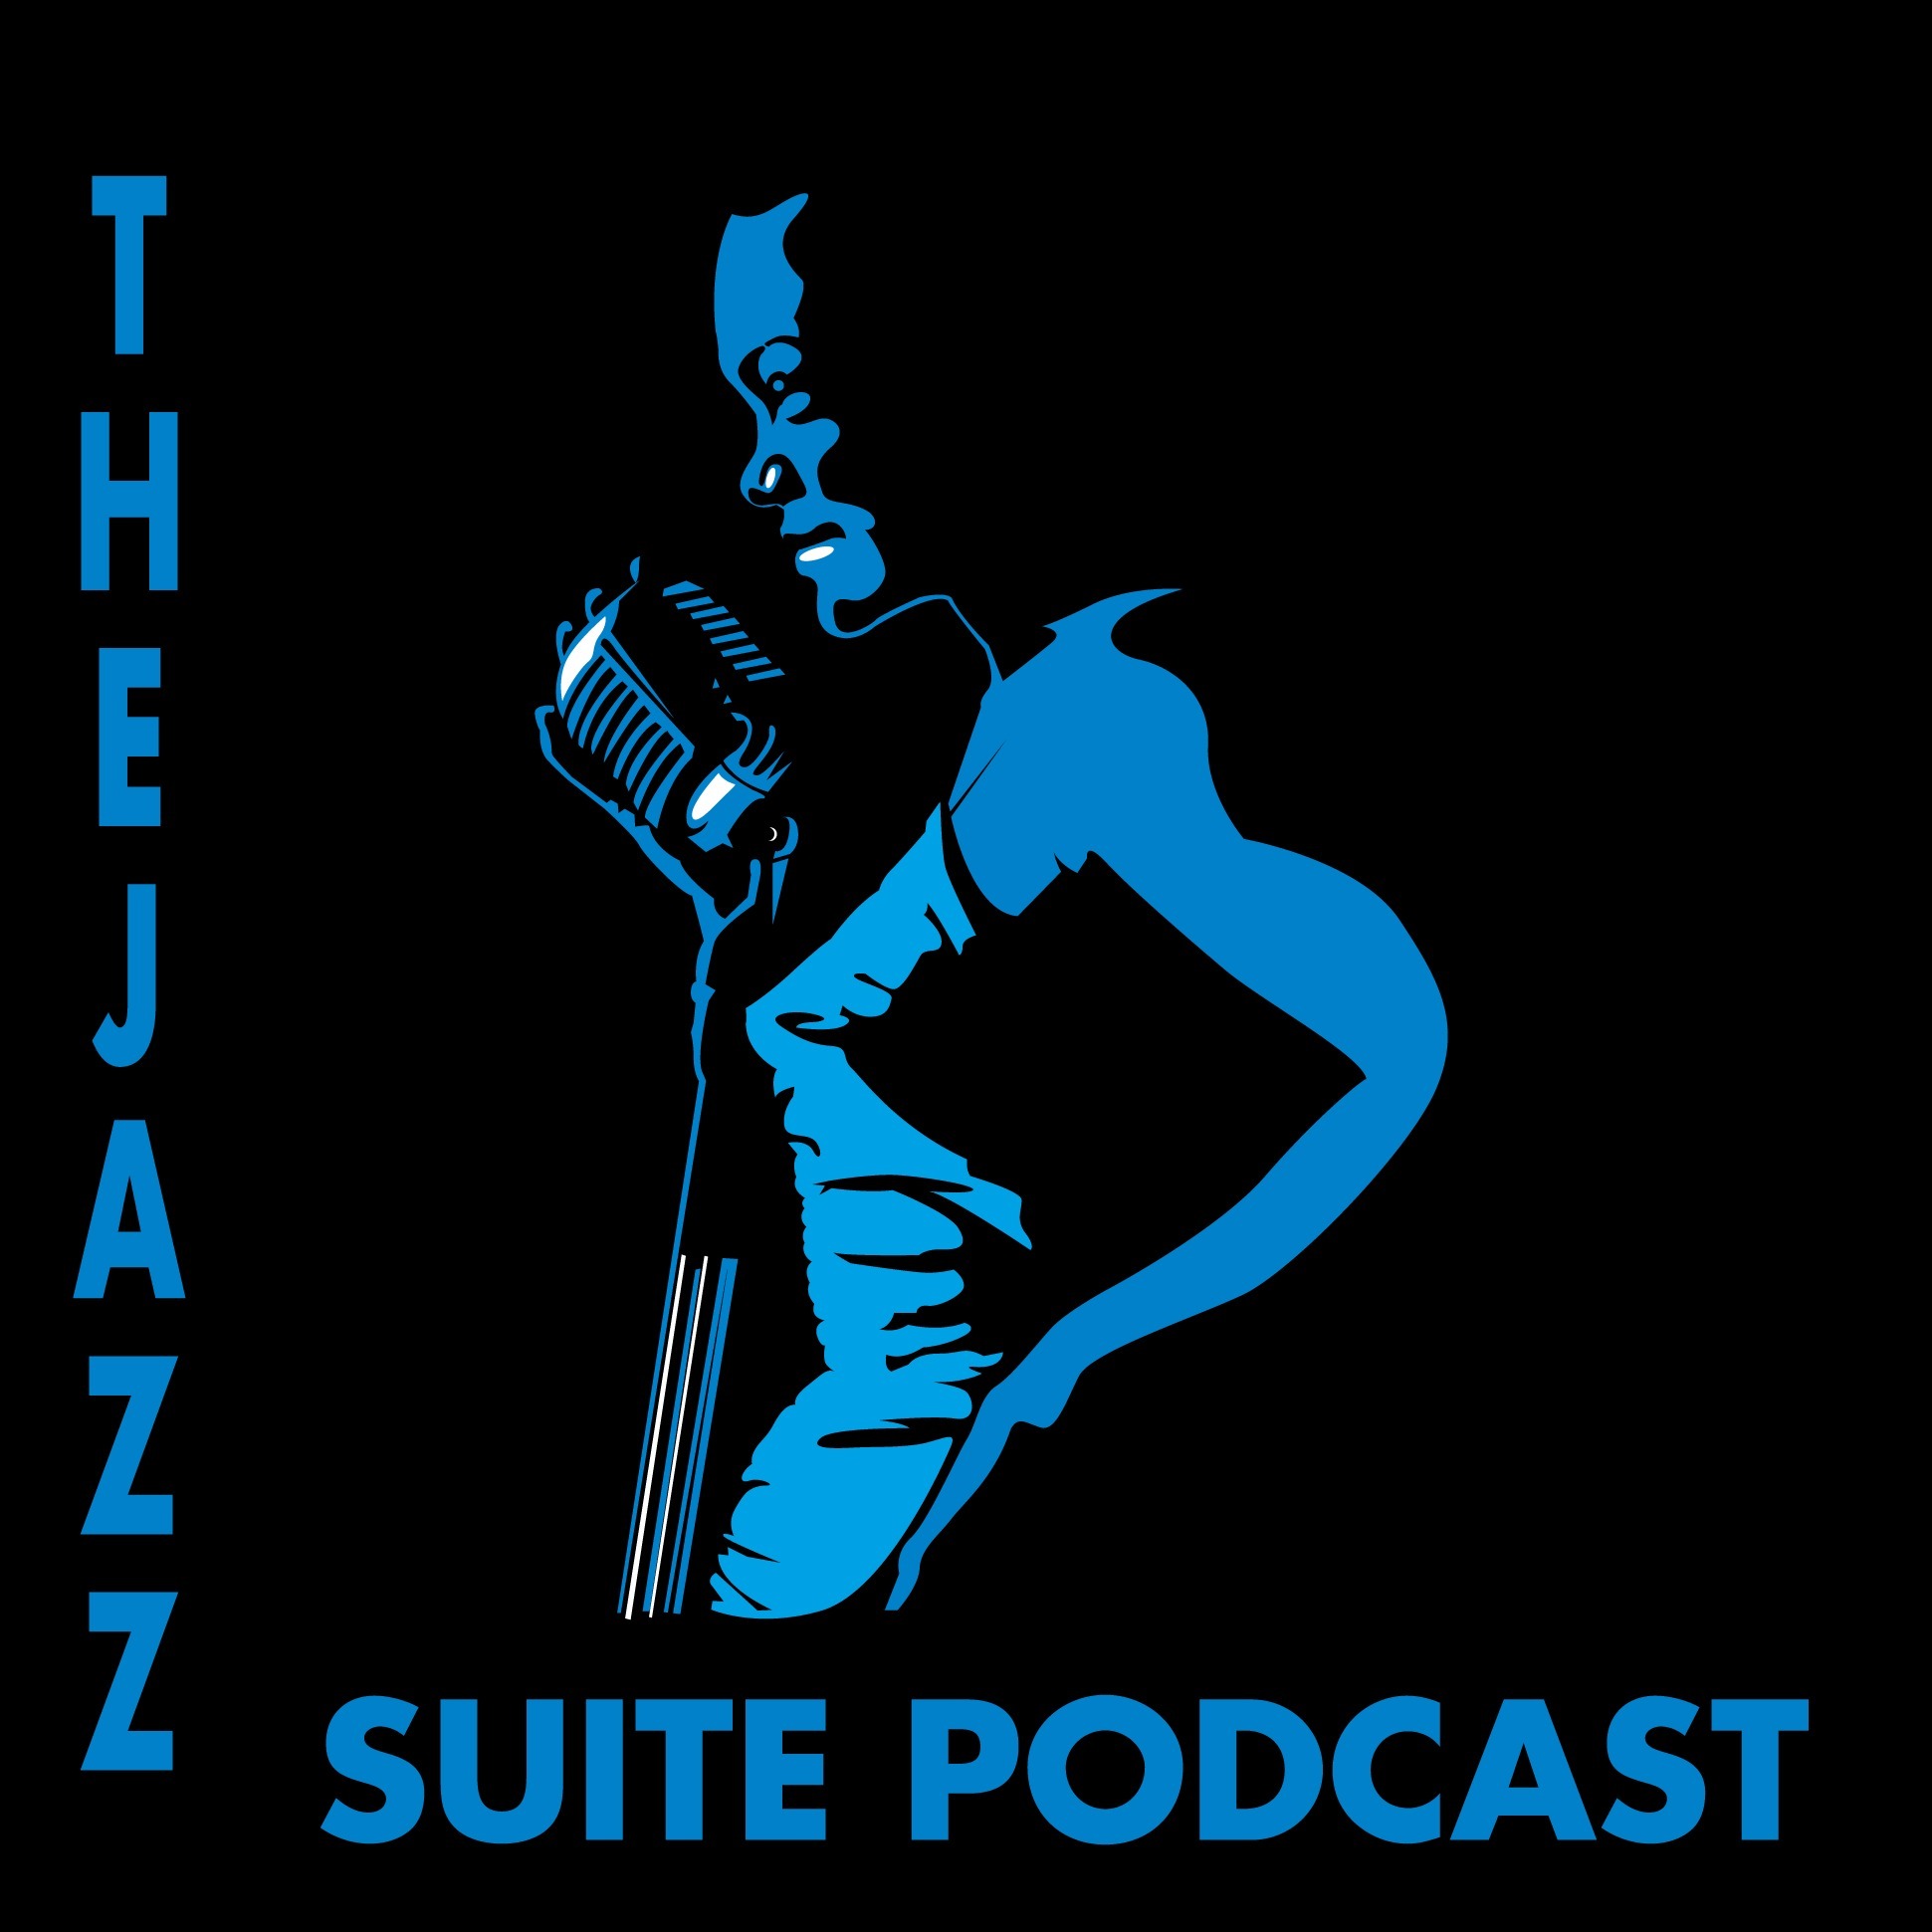 The Jazz Suite Podcast Show #462